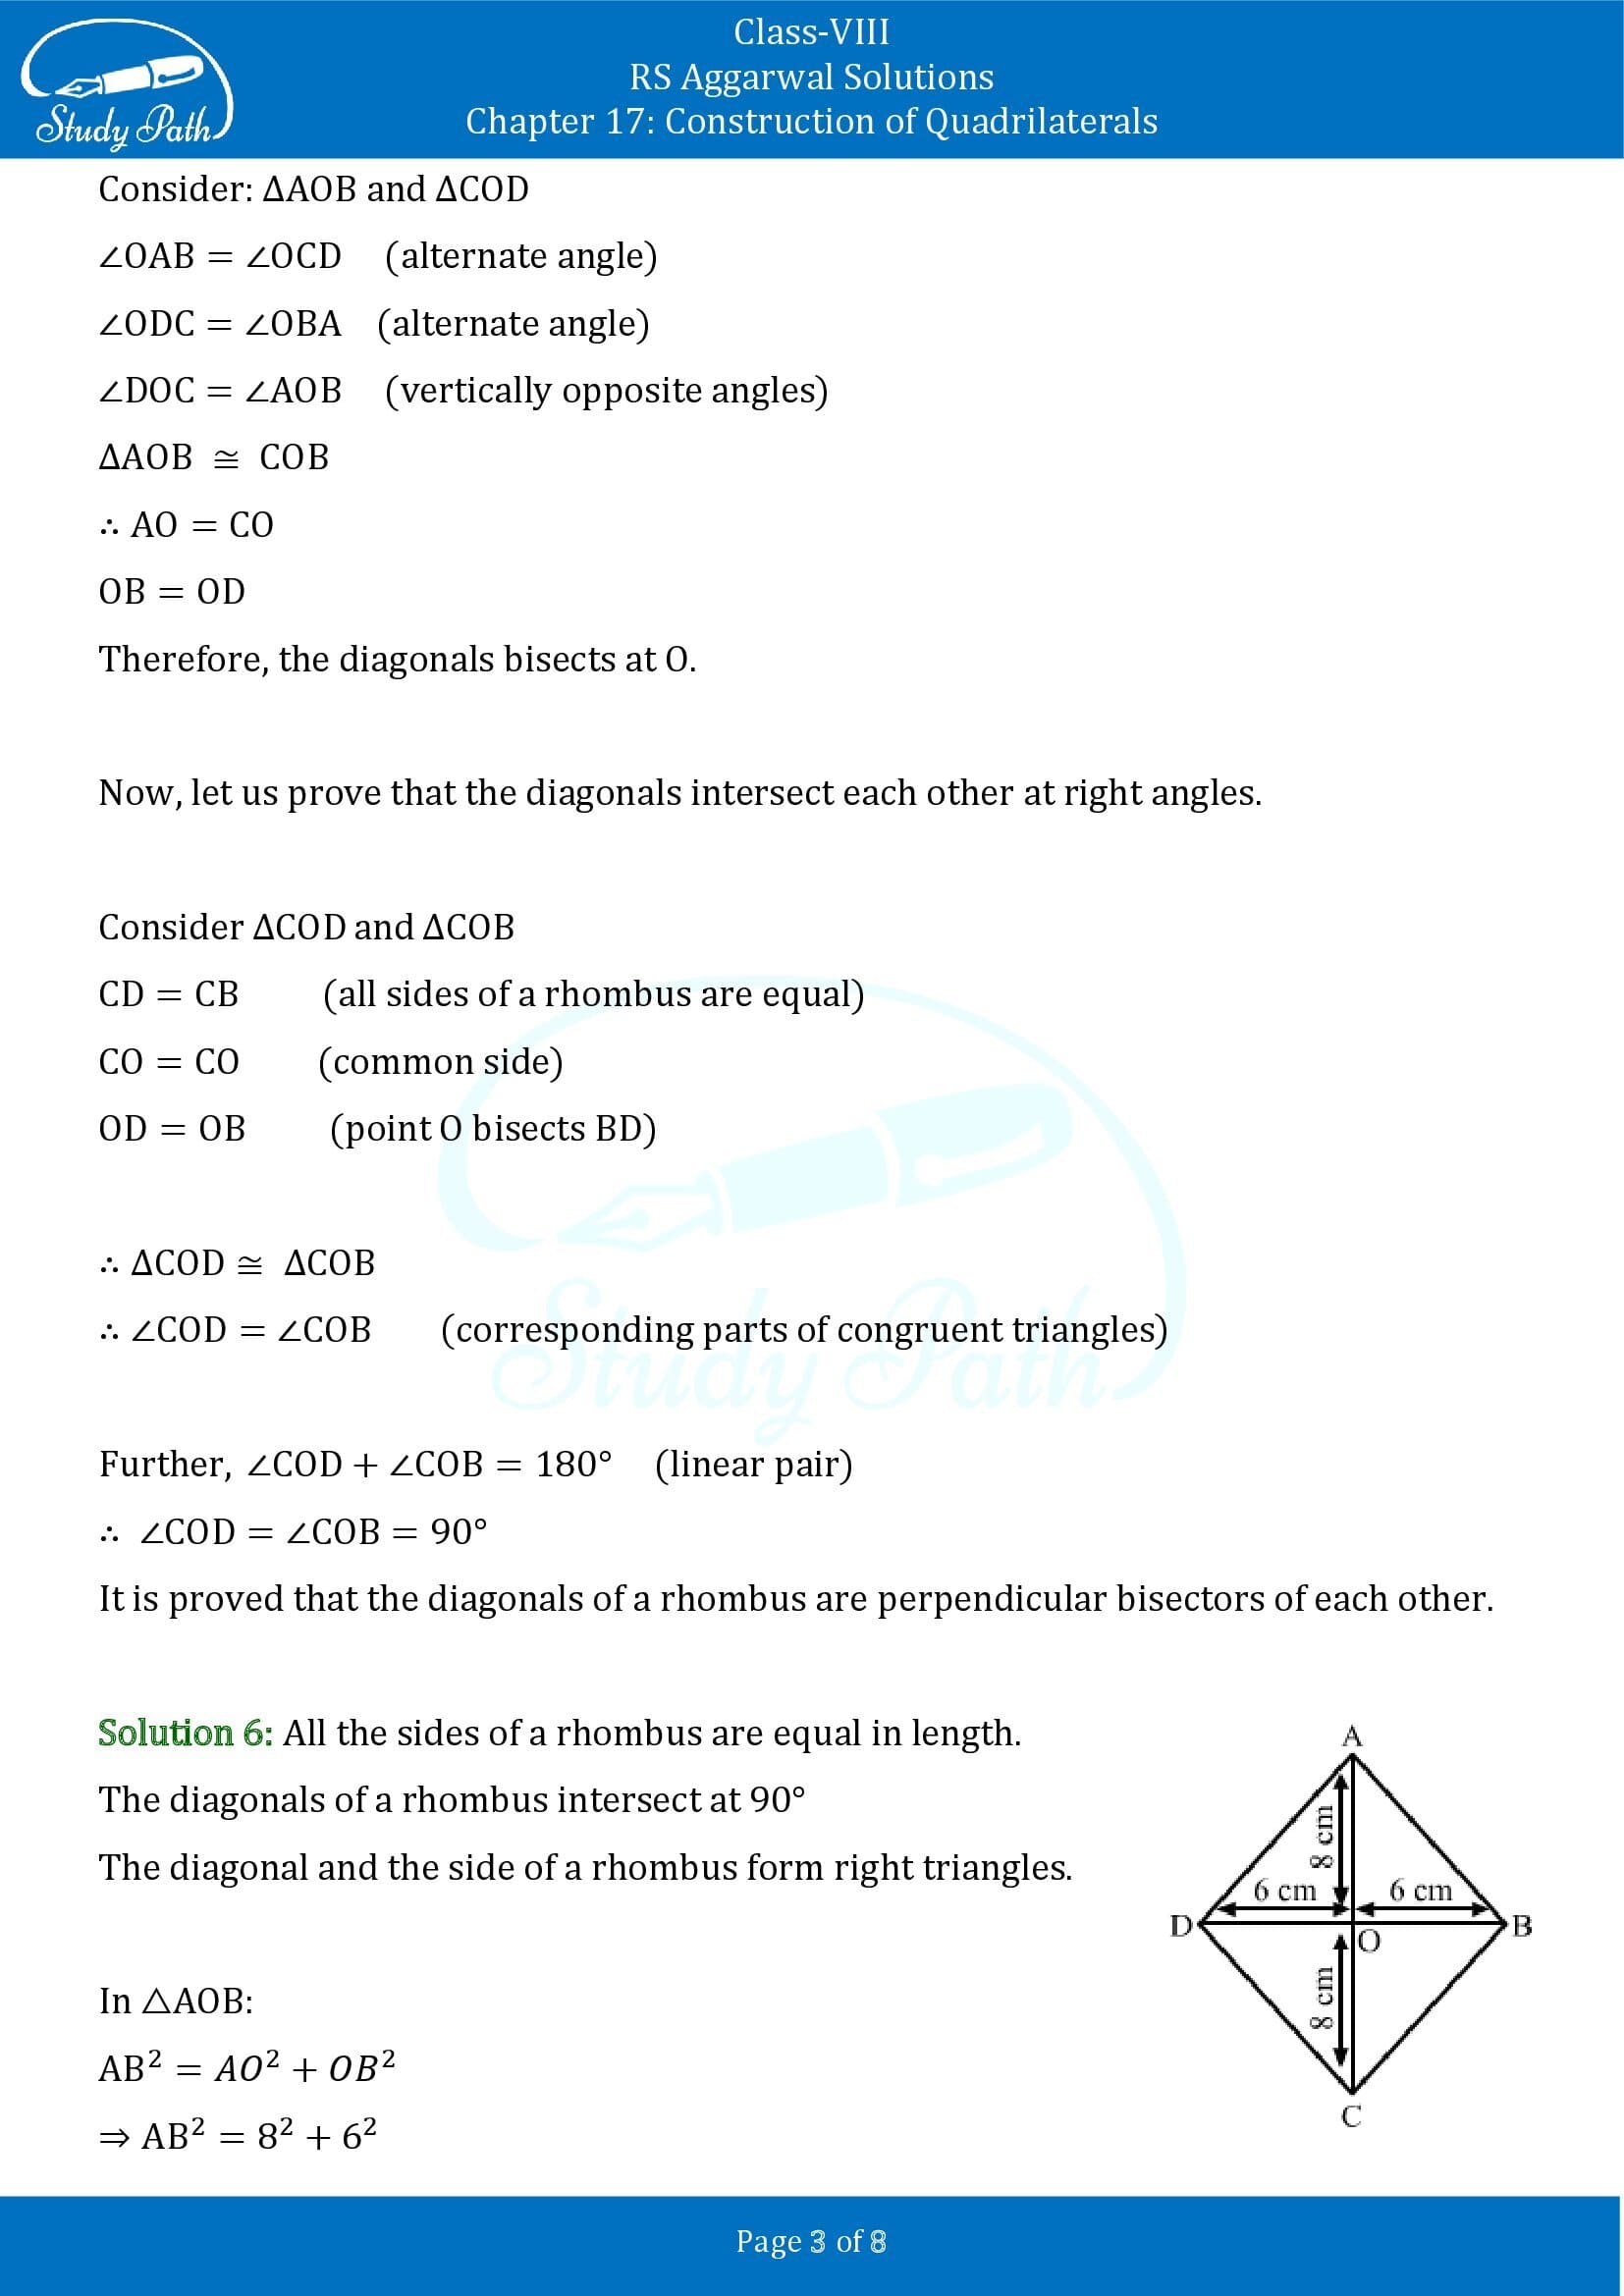 RS Aggarwal Solutions Class 8 Chapter 17 Construction of Quadrilaterals Test Paper 0003